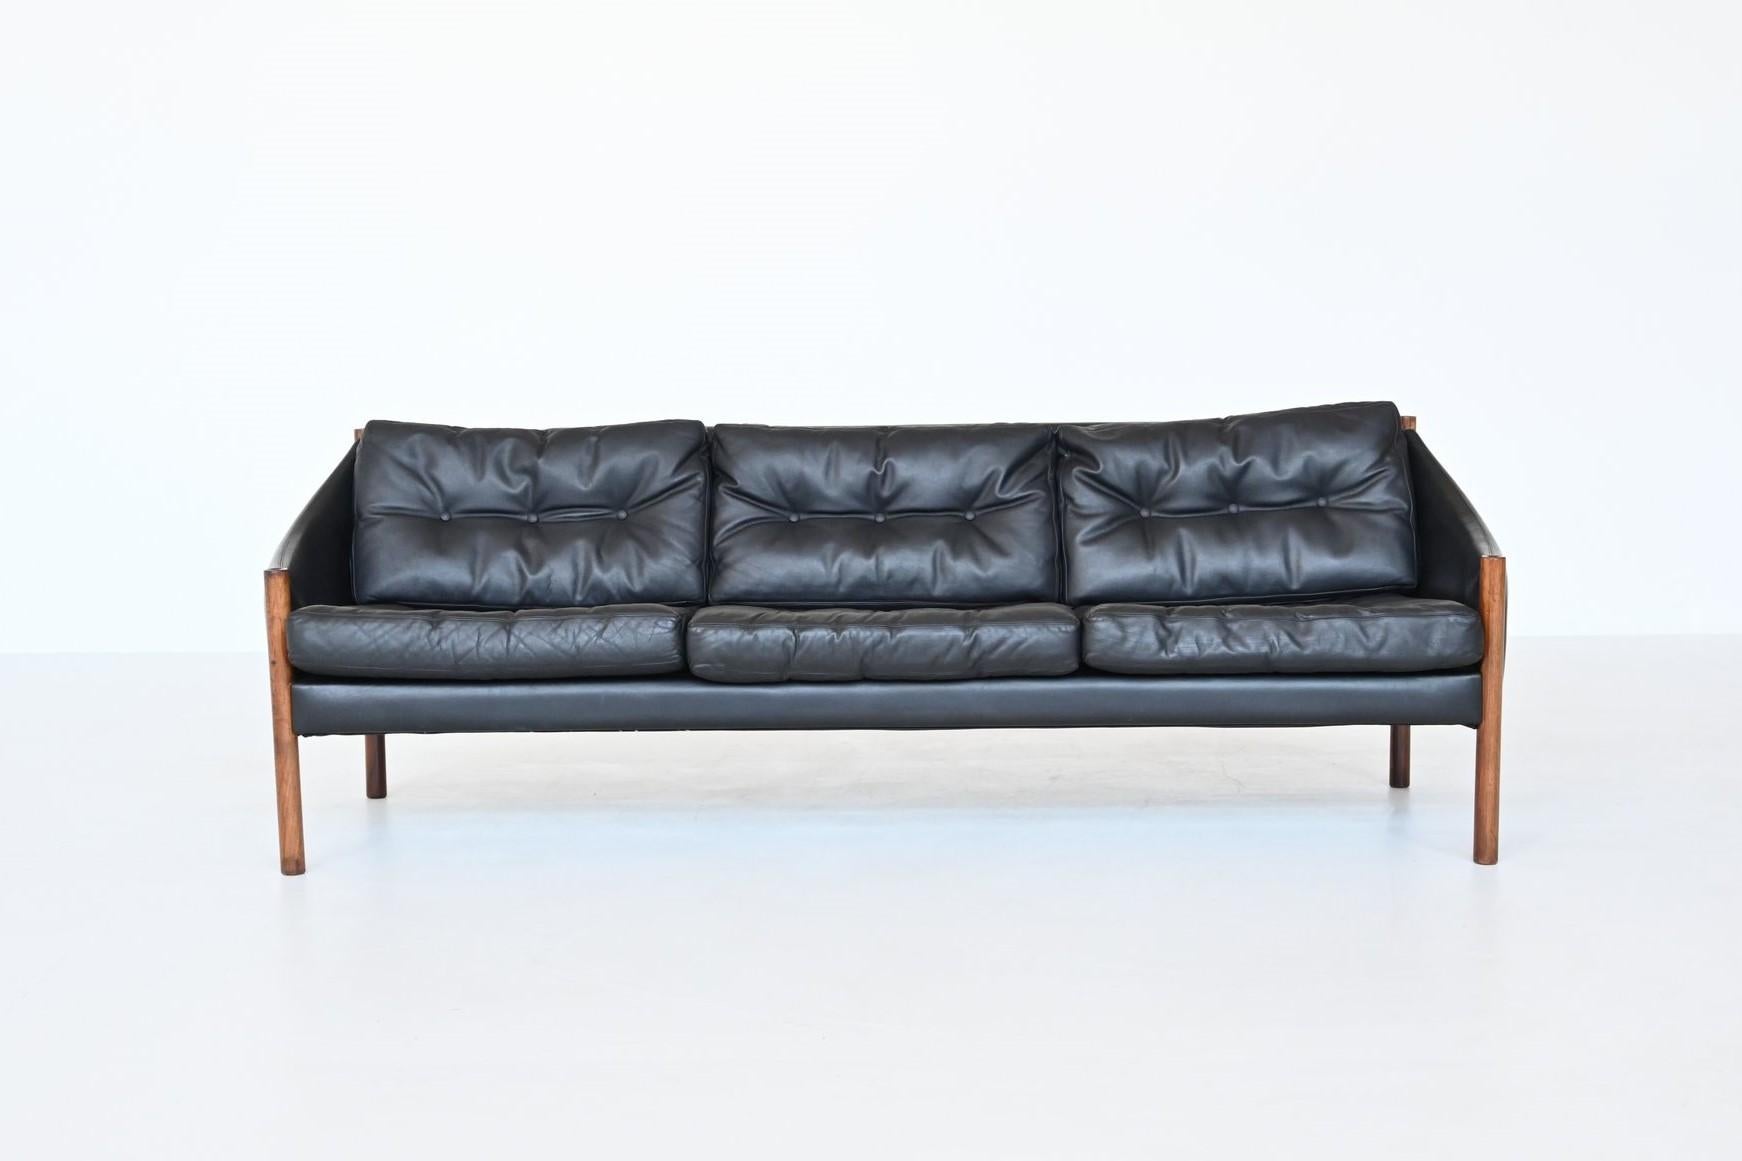 Beautiful shaped Scandinavian lounge sofa, Denmark 1960. This unique three-seater sofa has a solid rosewood frame with black leather upholstery. Very nice details are the well-crafted legs and high quality original leather. This amazing sofa is